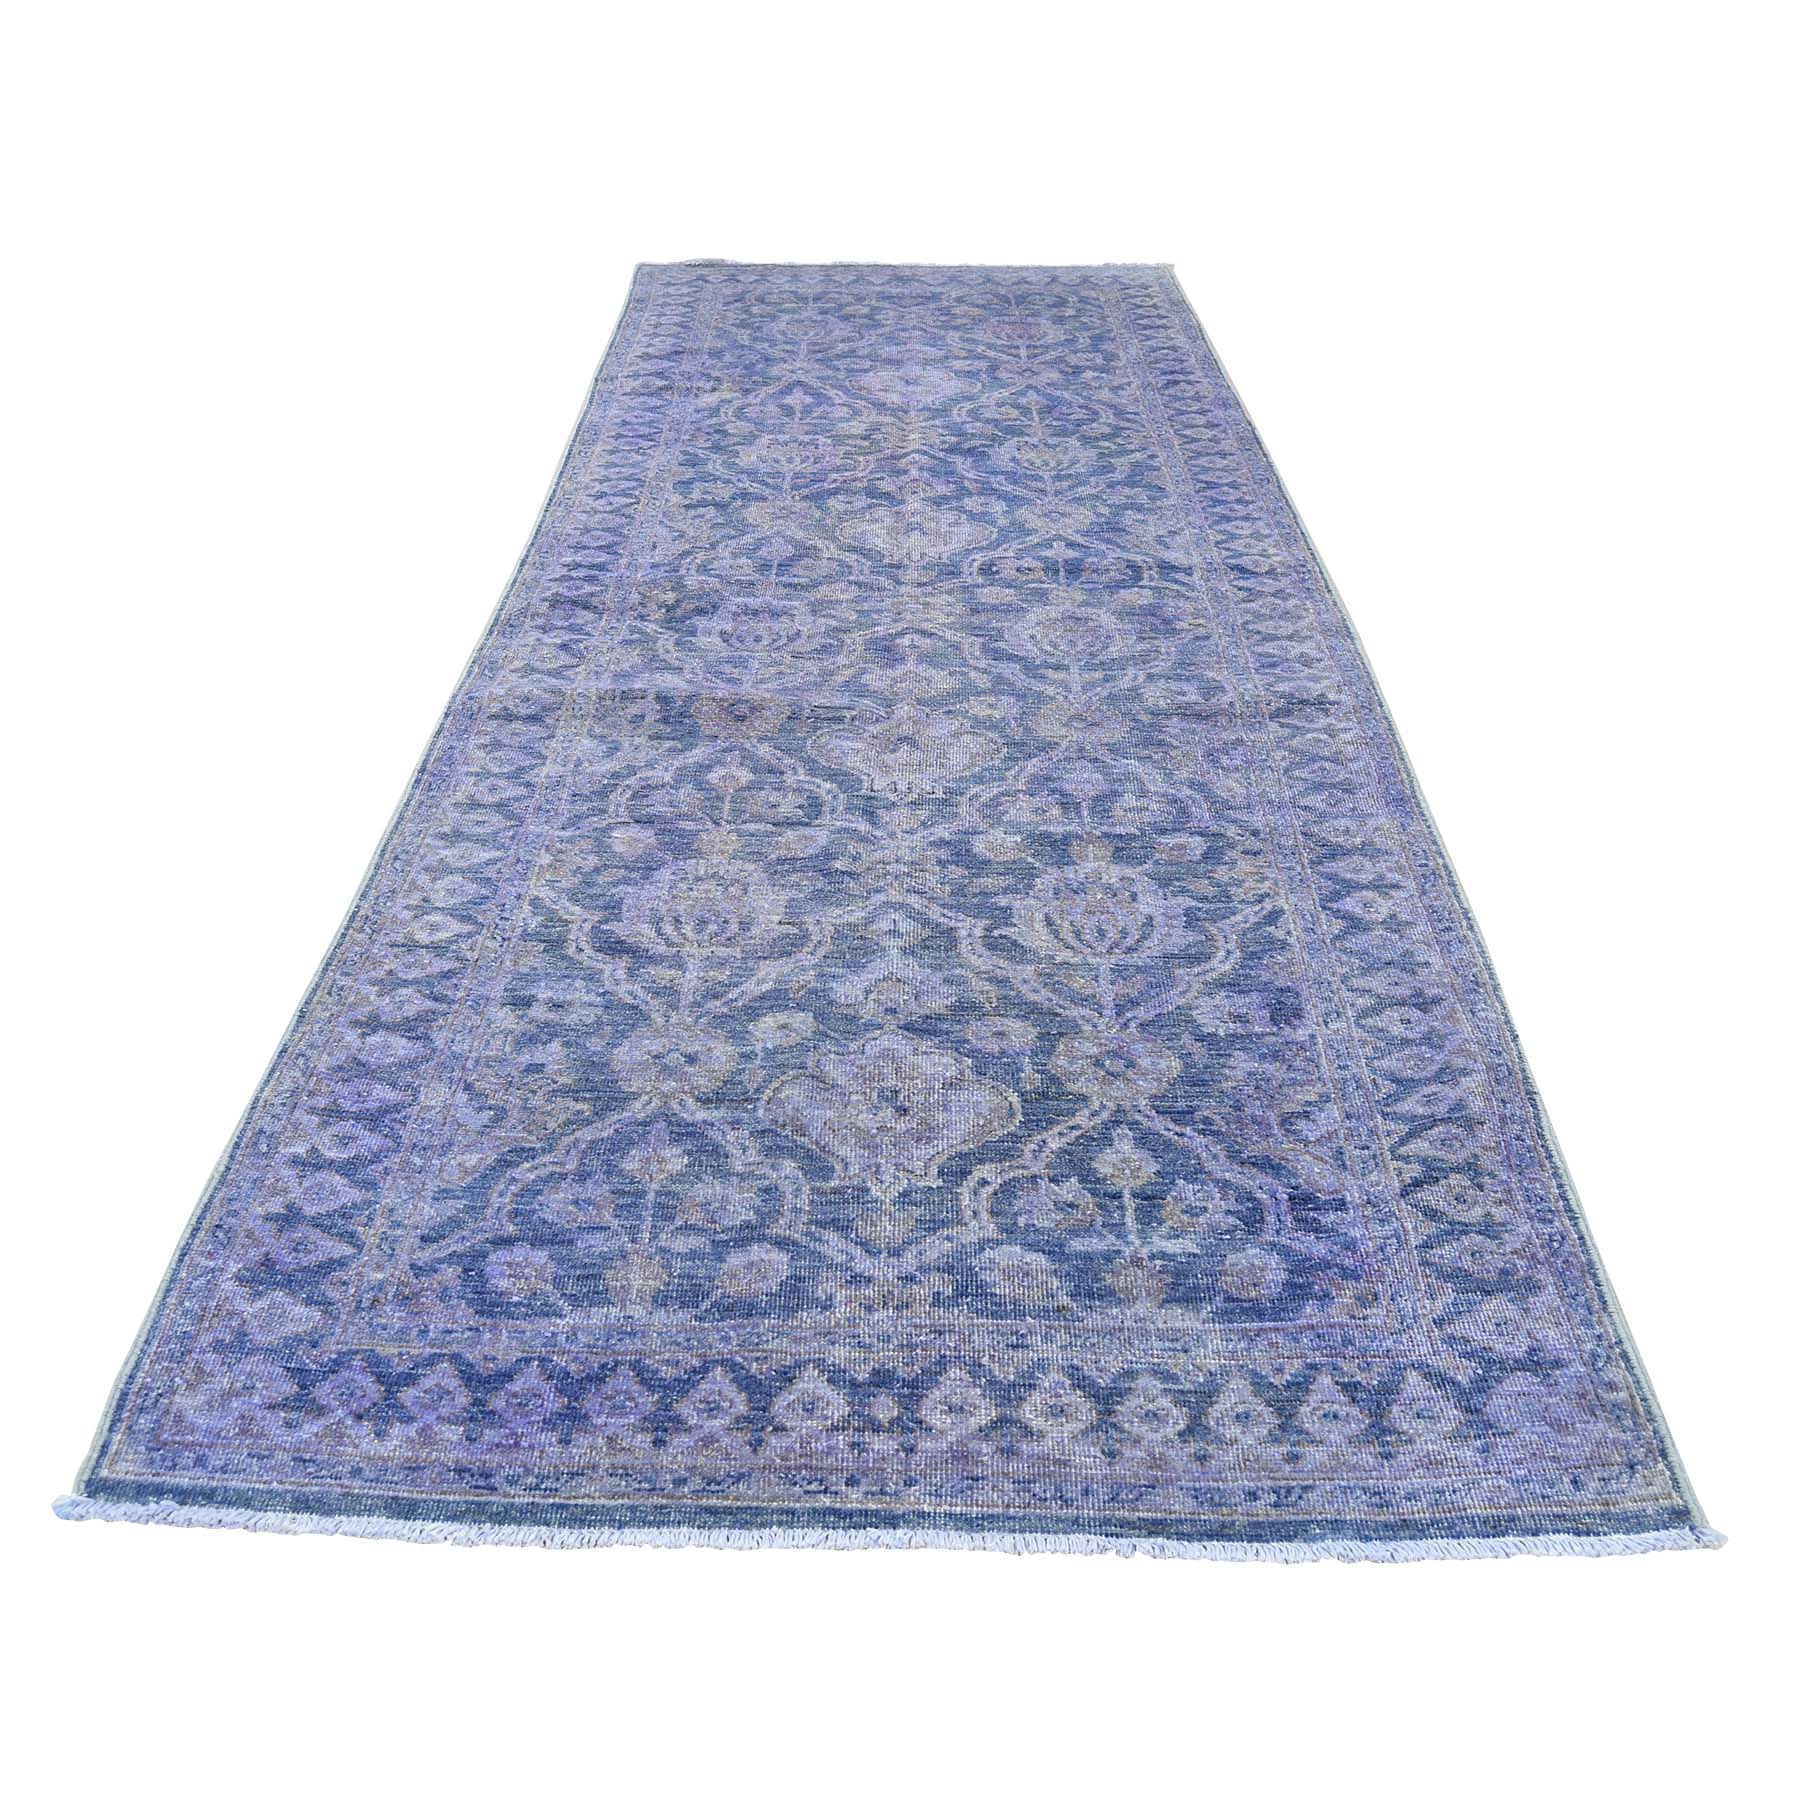 4-1 x11-10  Wide Runner Overdyed Peshawar Hand-Knotted Oriental Rug 